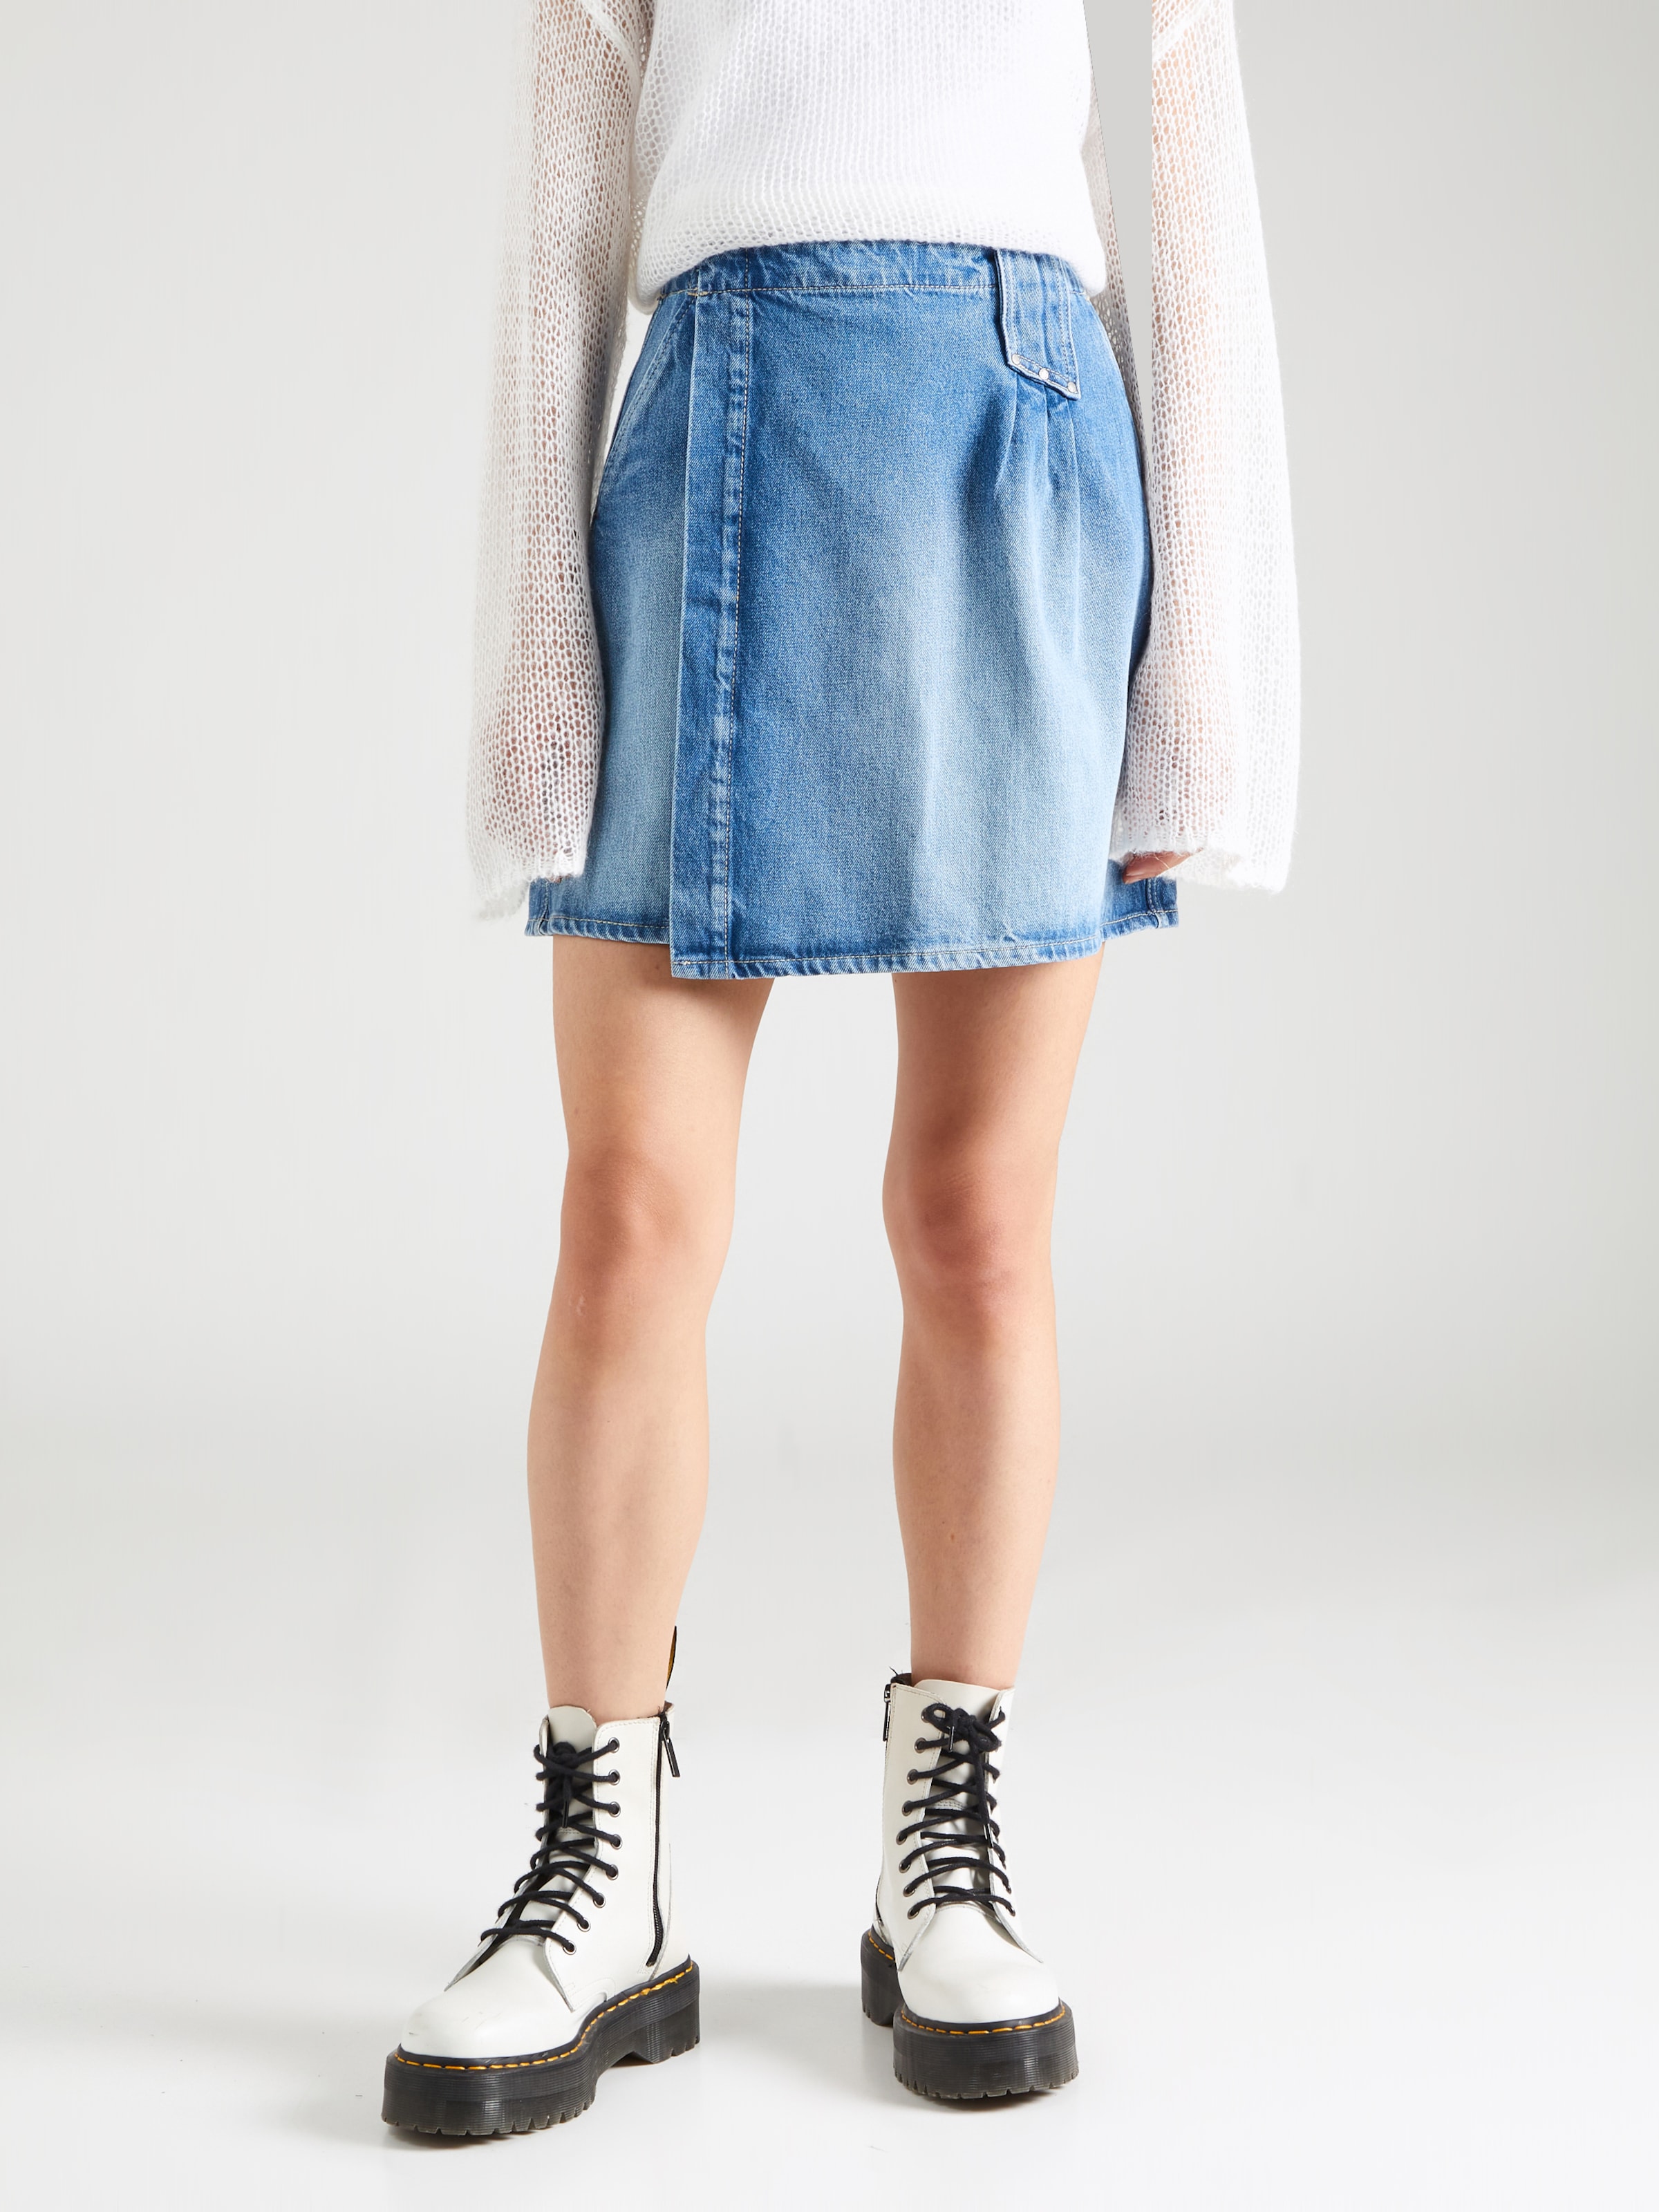 Pepe + Denim = Goodness - FROM HATS TO HEELS